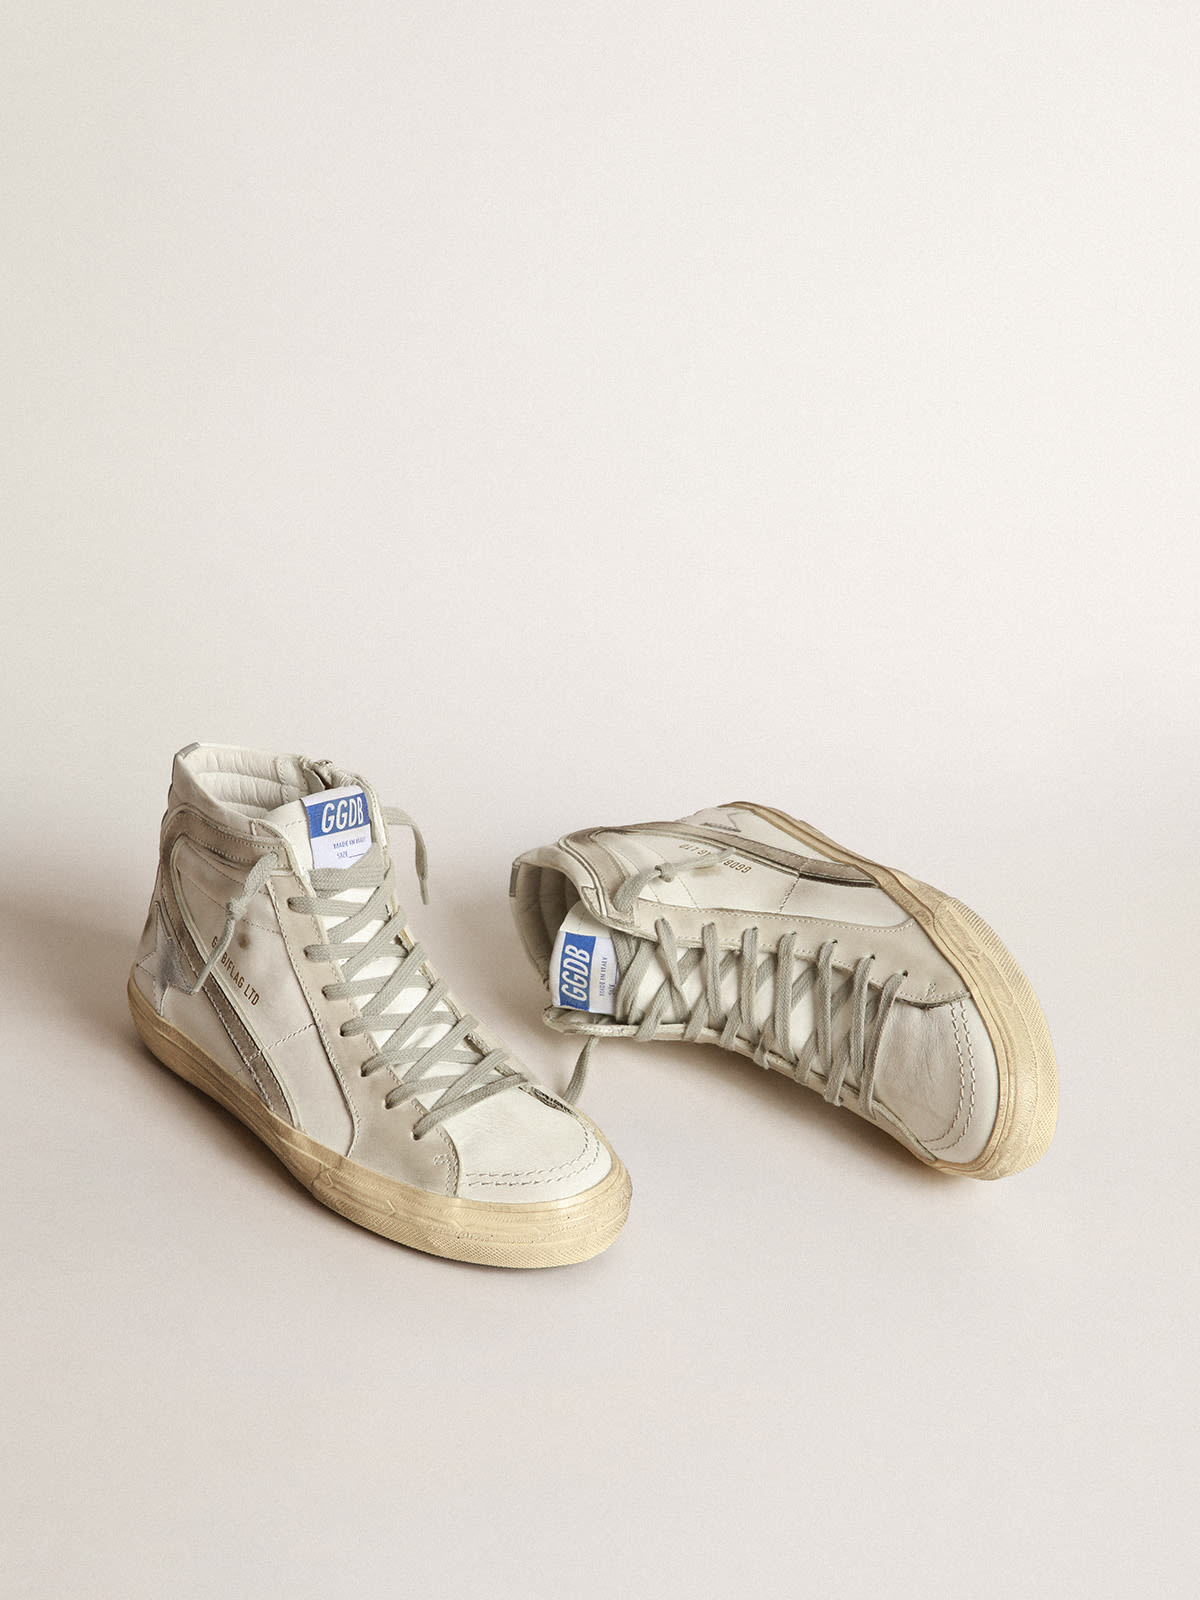 Slide LTD sneakers with silver laminated leather star and gray nubuck flash  | Golden Goose